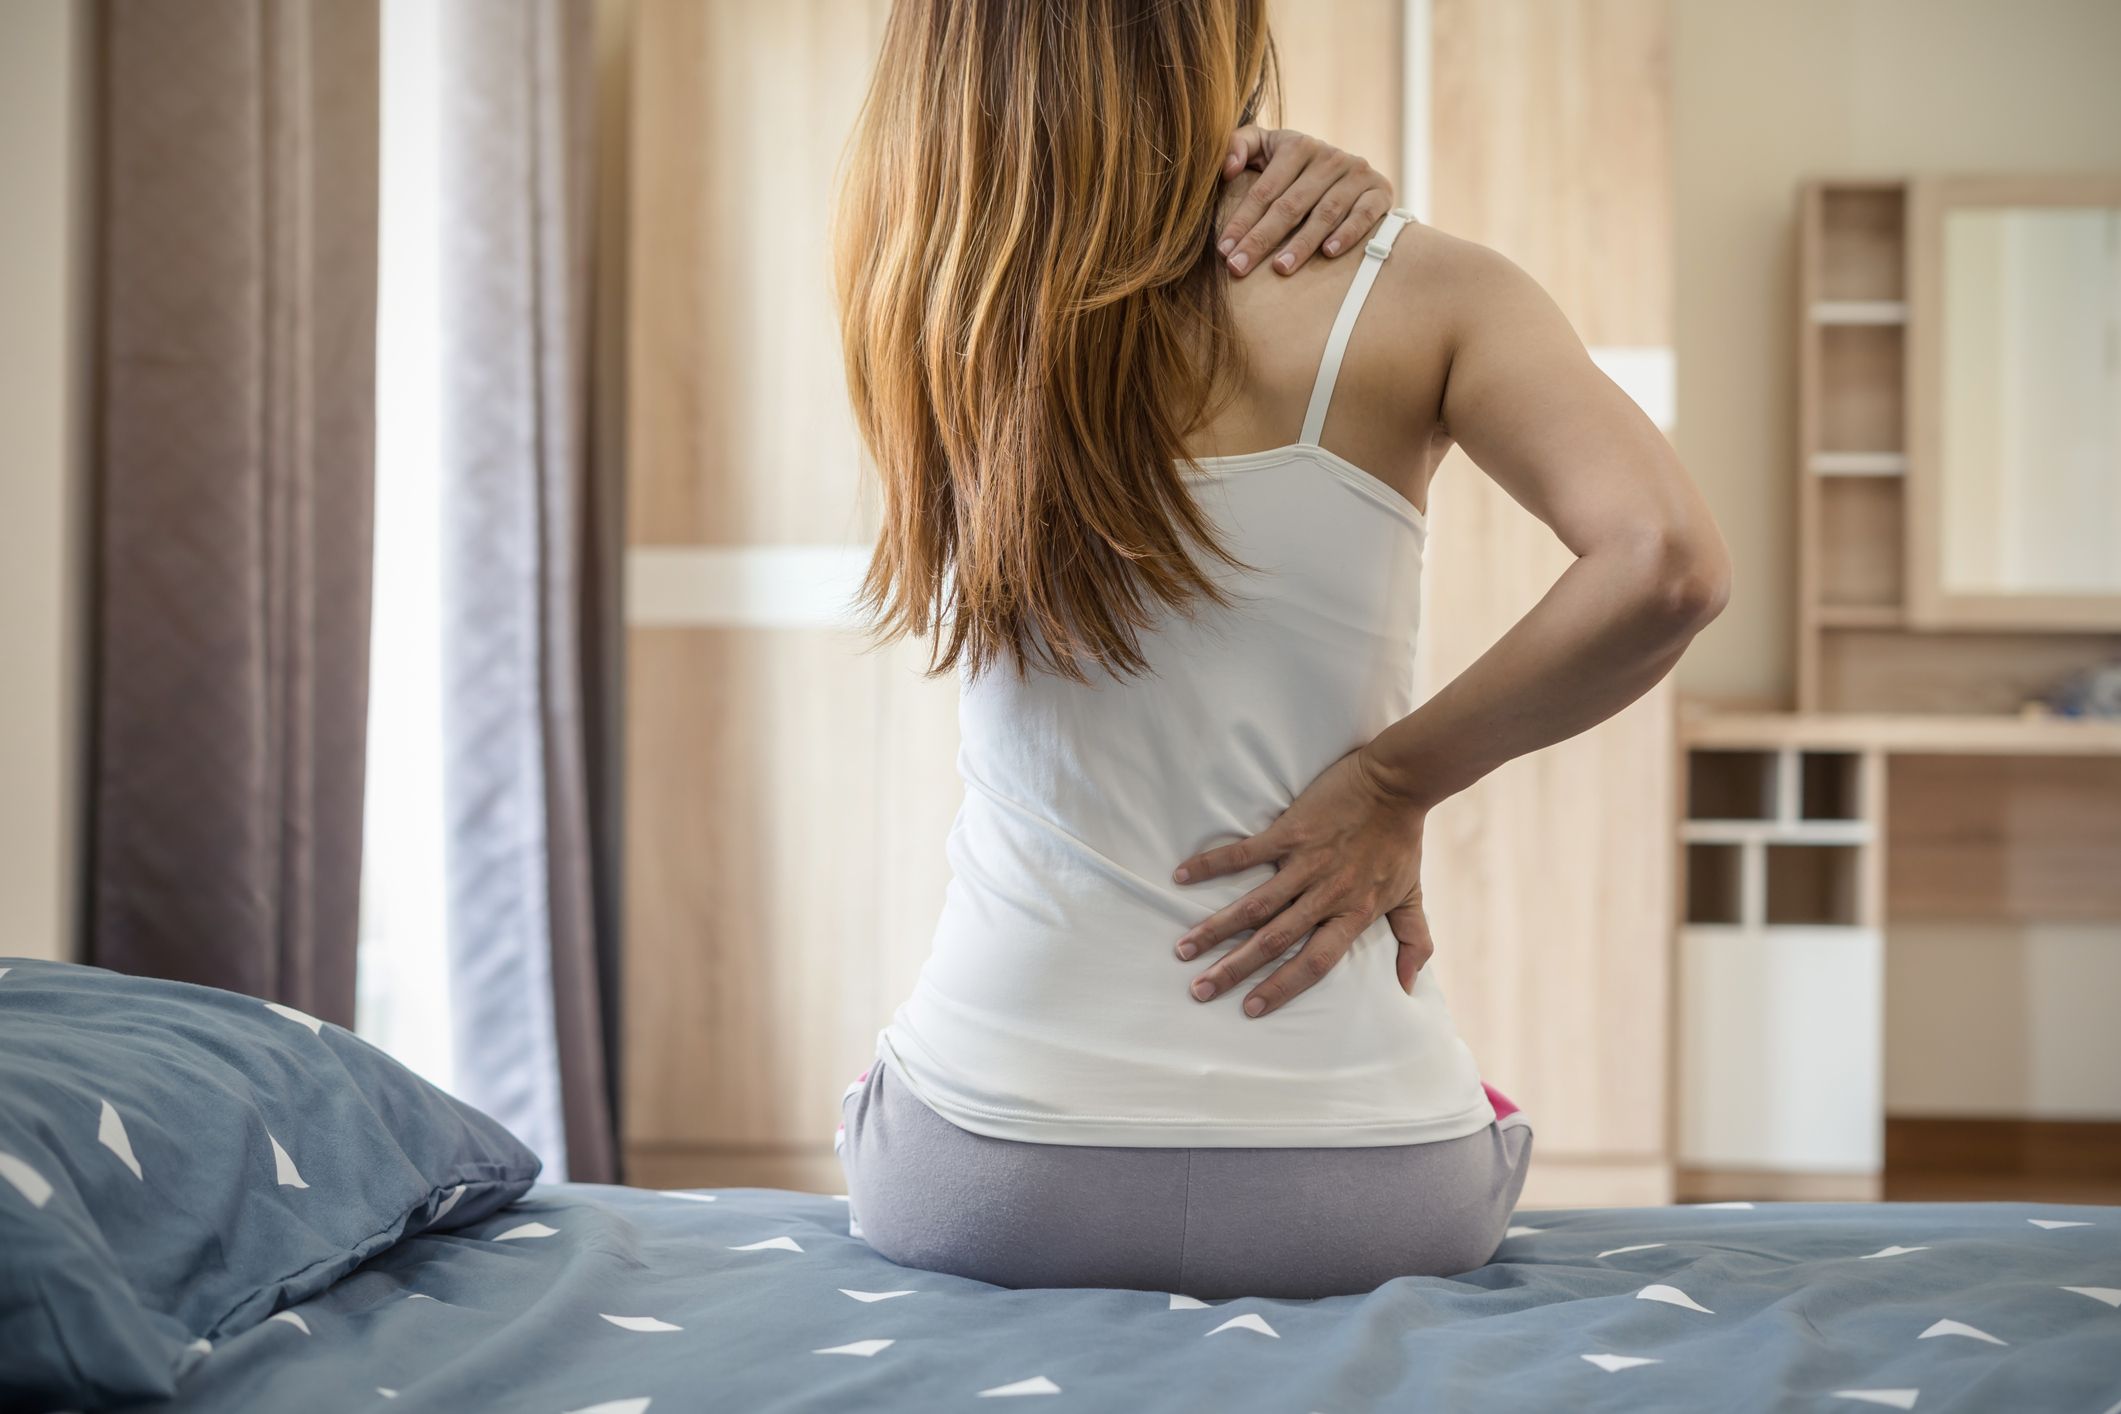 10 Best Products for Back Pain Relief - Parade